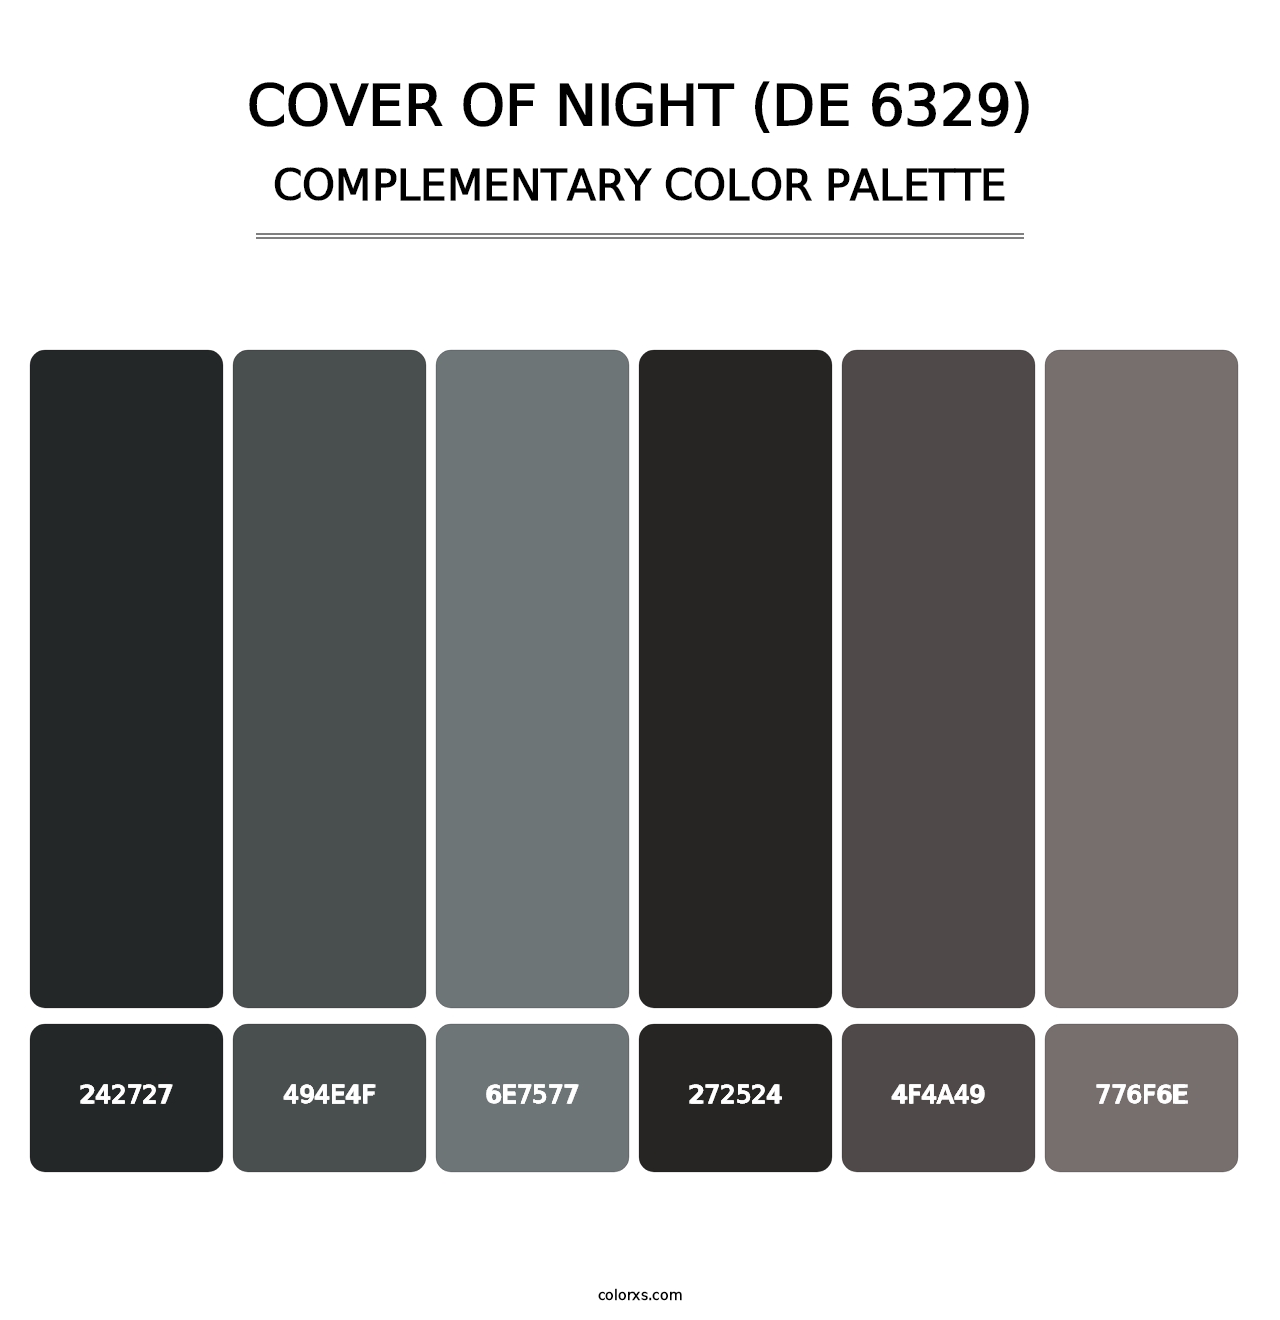 Cover of Night (DE 6329) - Complementary Color Palette